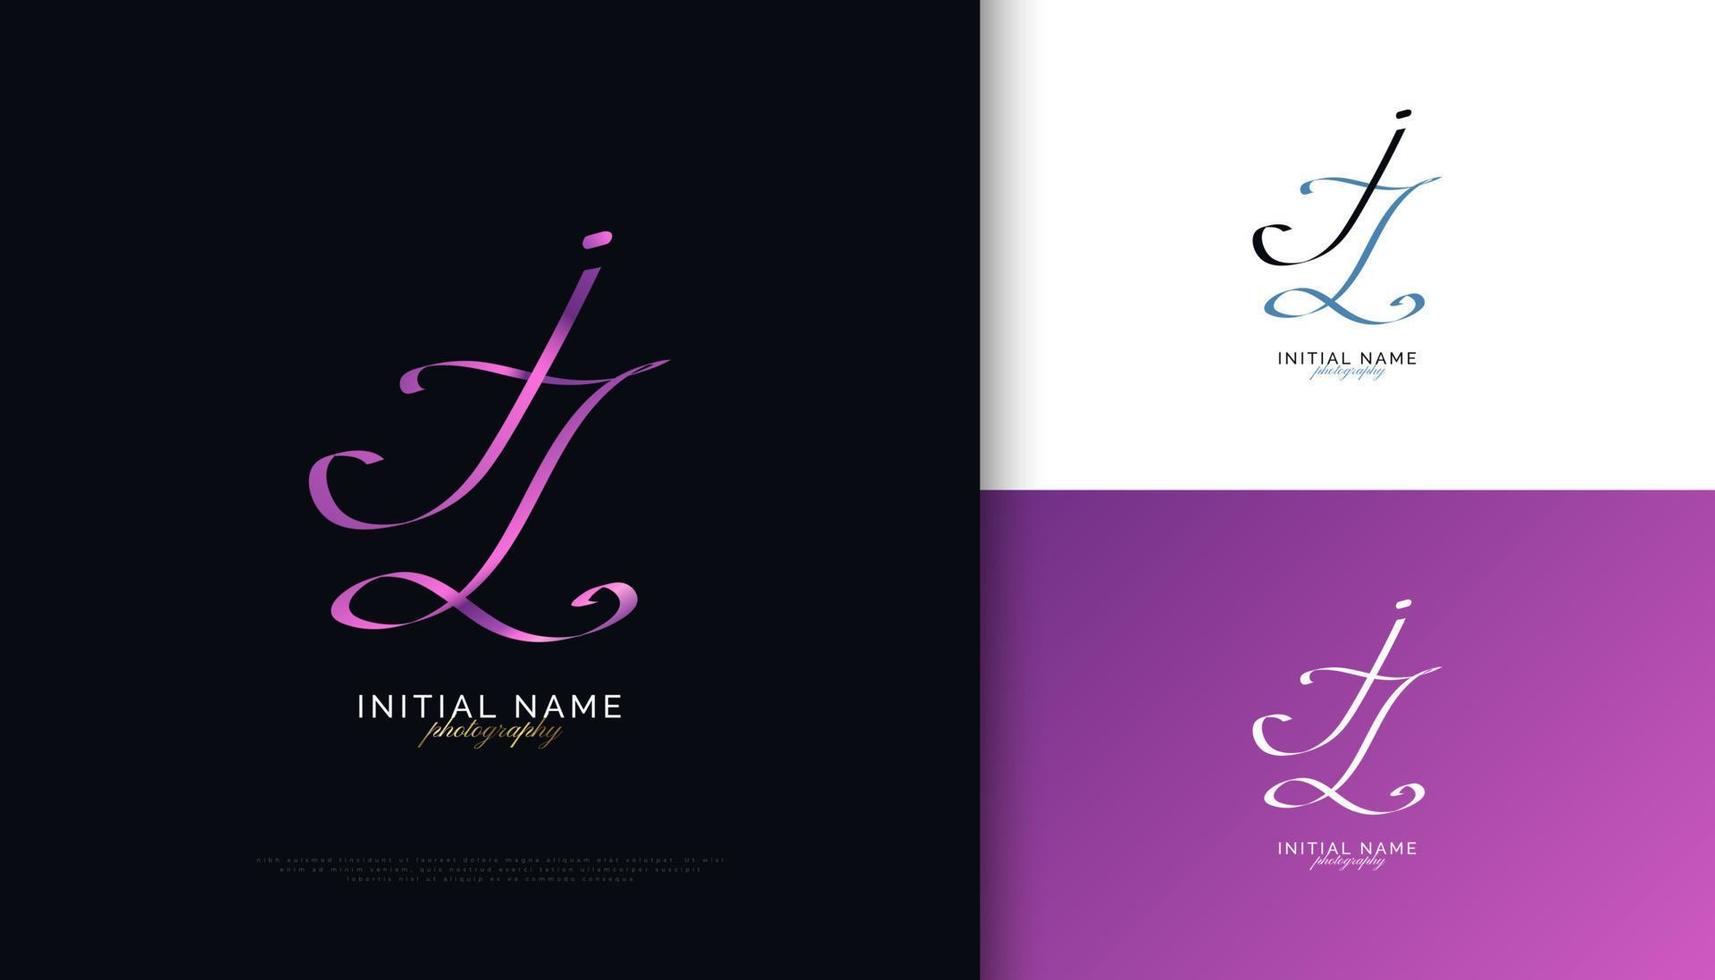 JZ Initial Signature Logo Design with Elegant and Minimalist Handwriting Style. Initial J and Z Logo Design for Wedding, Fashion, Jewelry, Boutique and Business Brand Identity vector